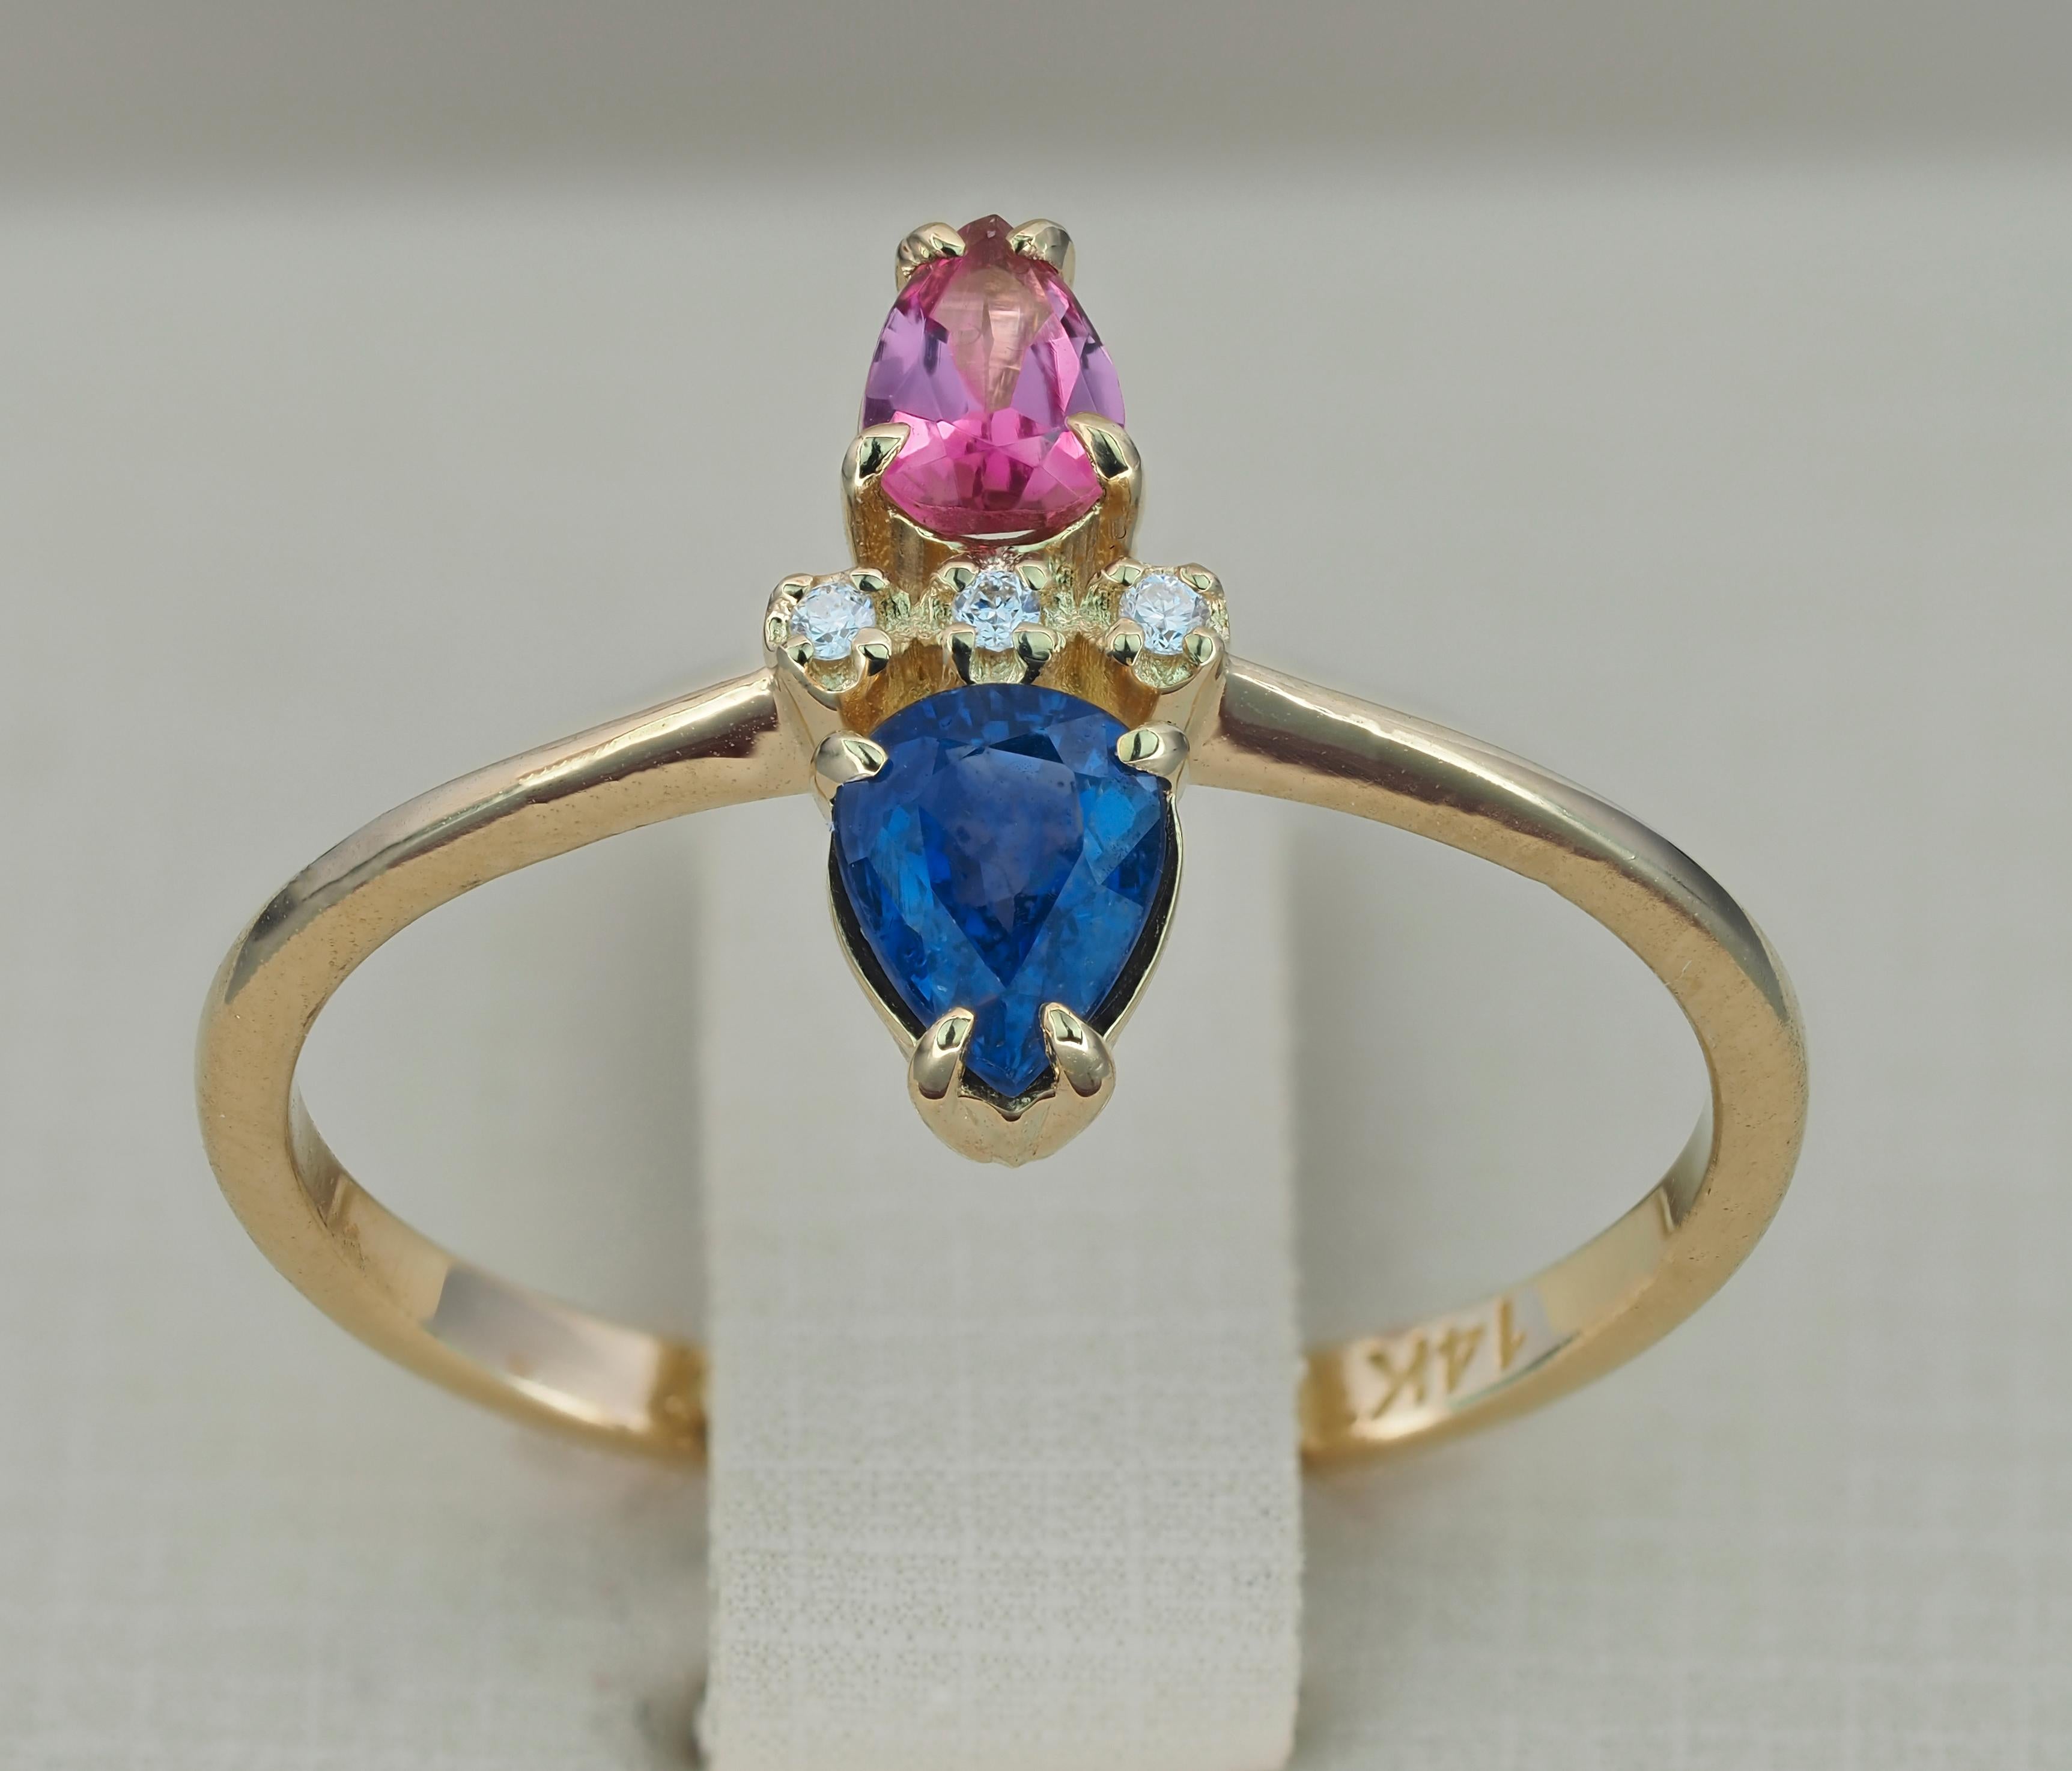 For Sale:  14k Gold Ring in Art Deco Style with Central Sapphire, Tourmaline and Diamonds 7